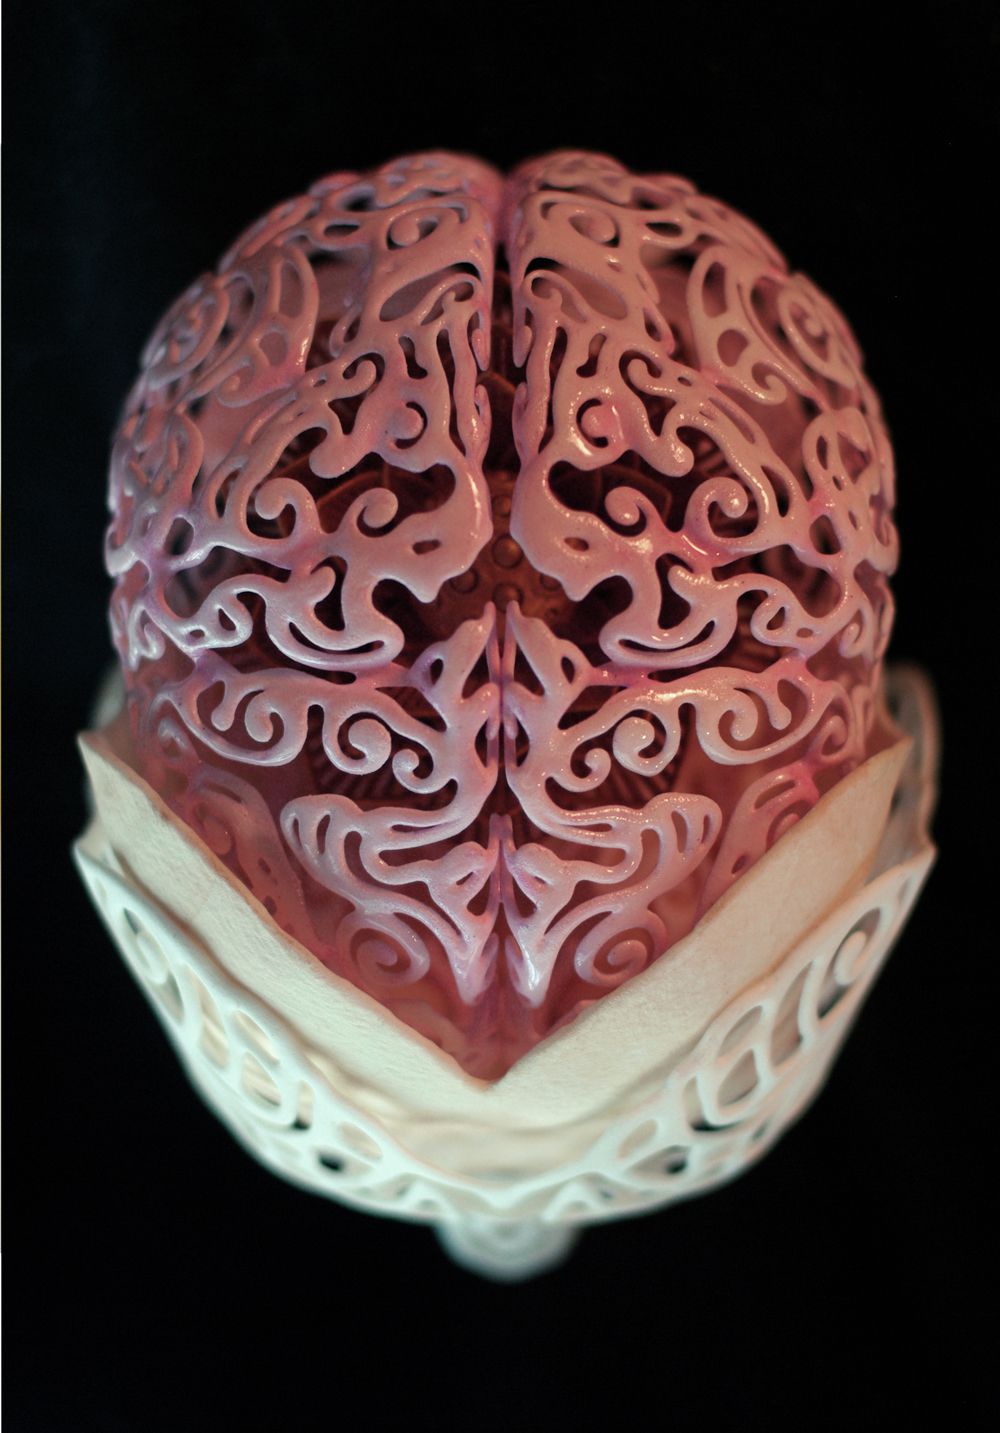 21st Century Self Portrait An Incredible Anatomical 3d Printed Sculpture By Joshua Harker 4